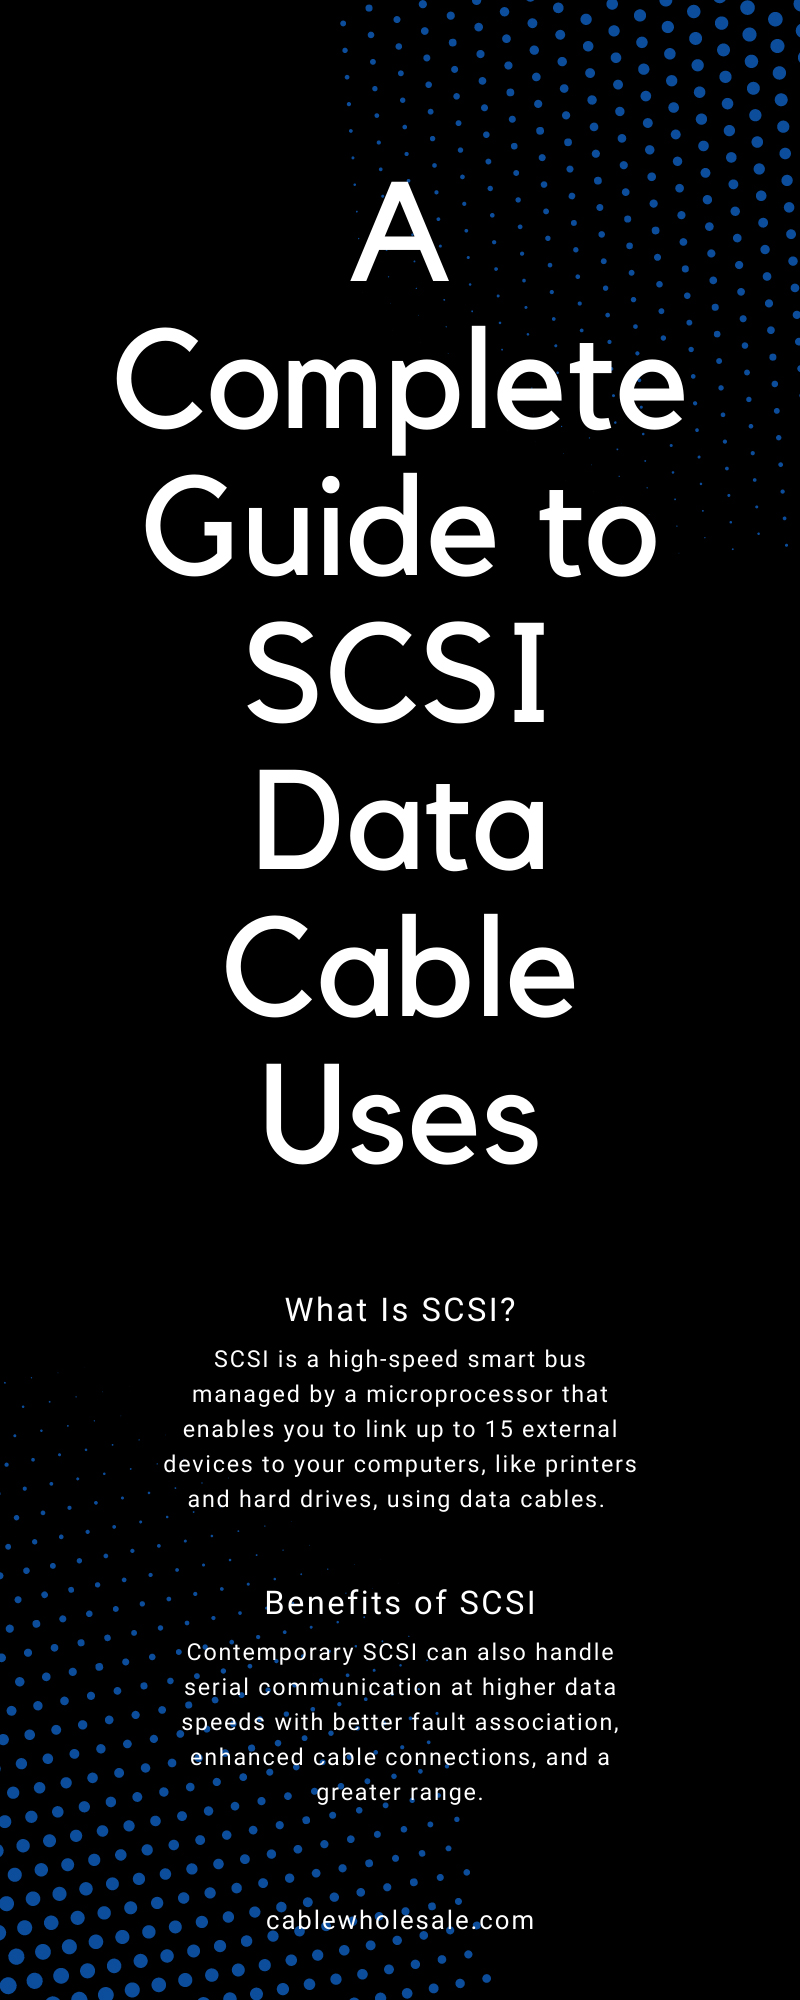 A Complete Guide to SCSI Data Cable Uses